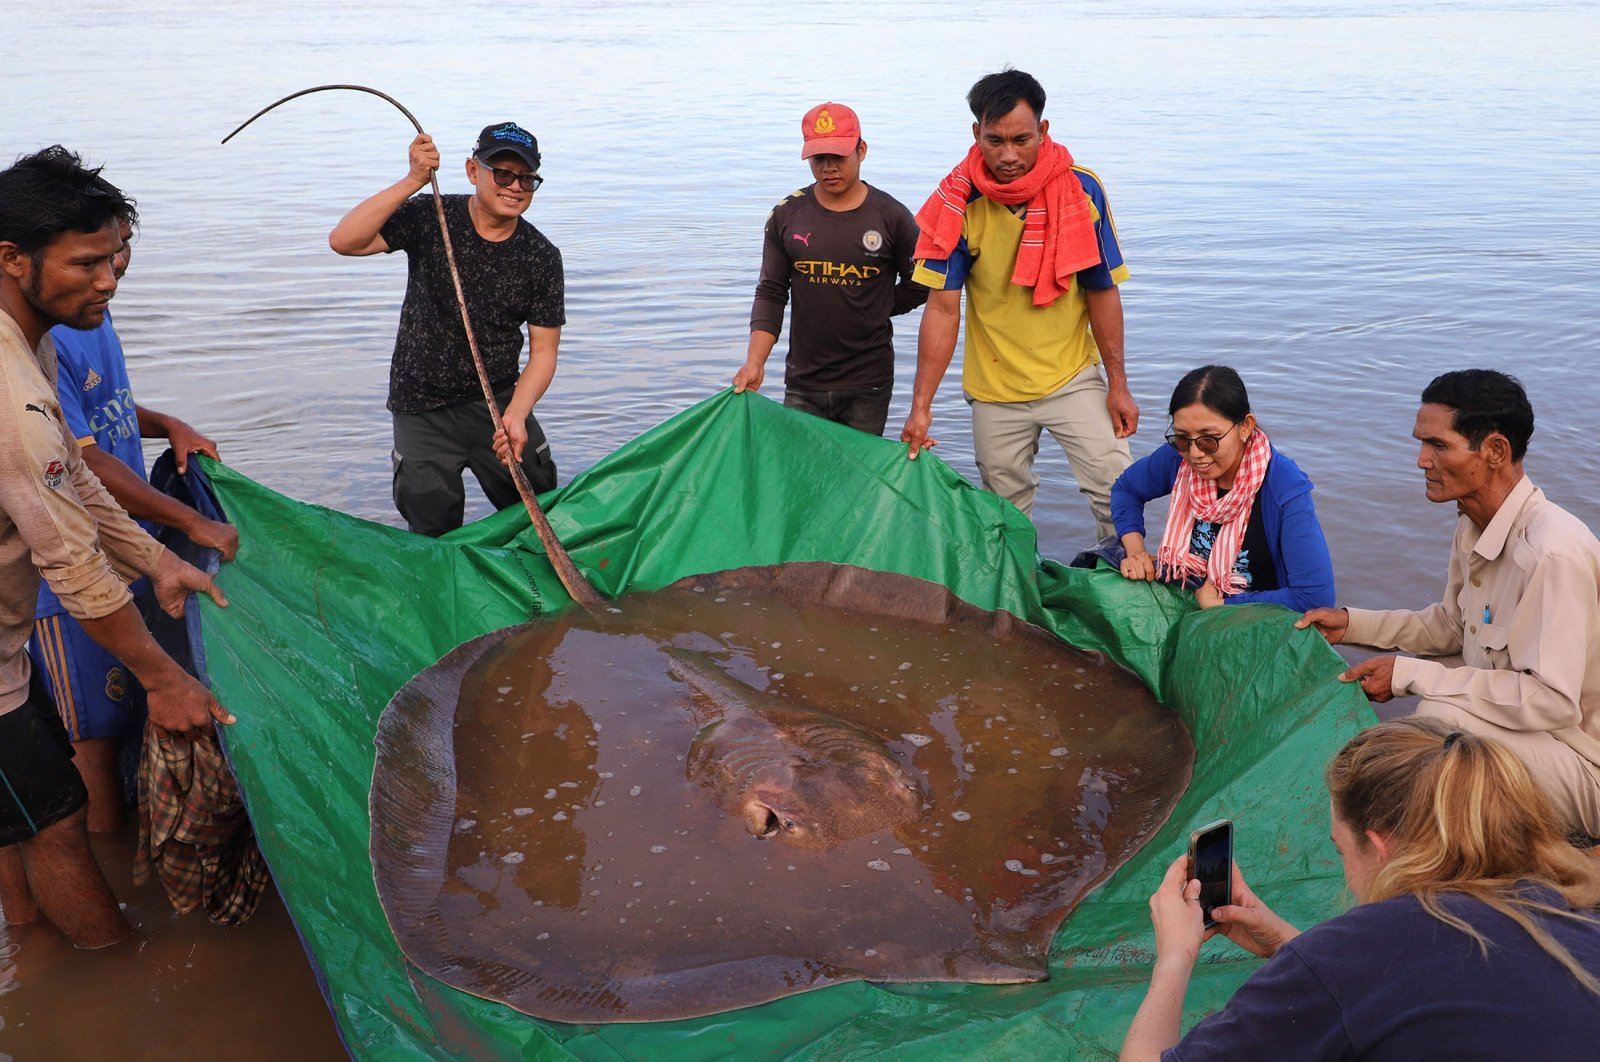 A giant female freshwater stingray was caught and released in the Mekong River in Stung Treng province, Cambodia, May 5, 2022. (Wonders of the Mekong via AFP)